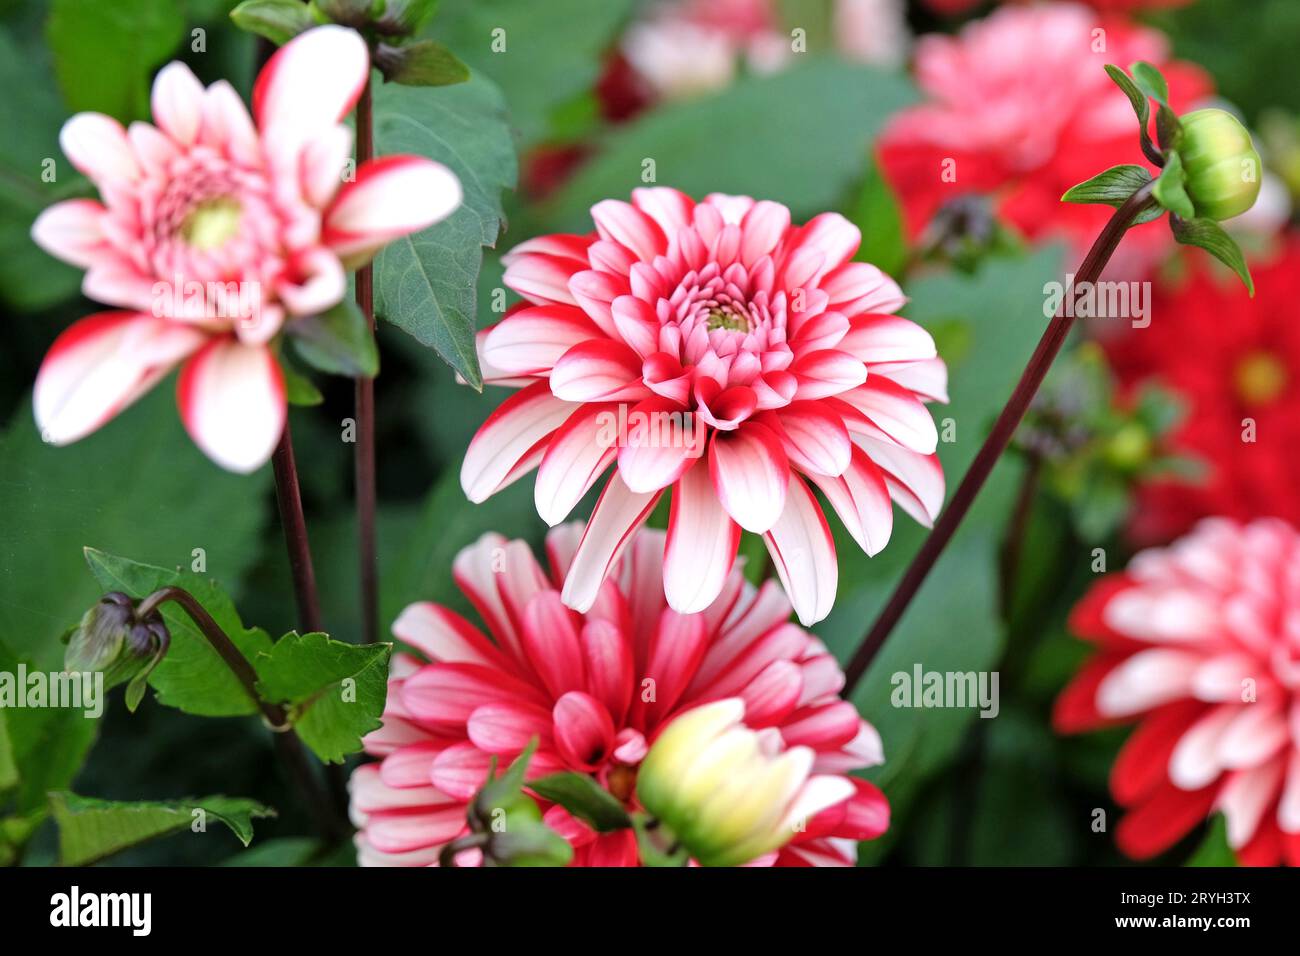 Red and white semi double decorative dahlia 'Pacific Time' in flower. Stock Photo